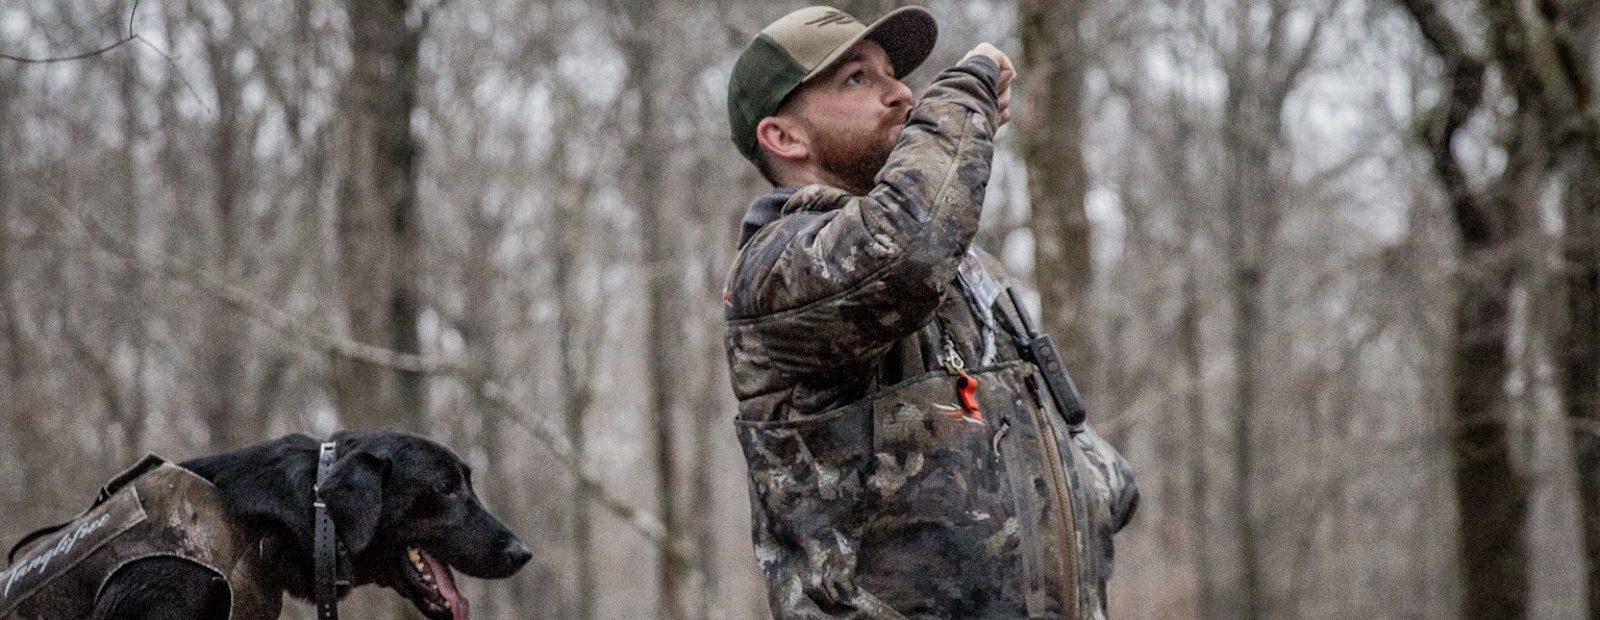 A duck hunter calls ducks while hunting with his black labrador